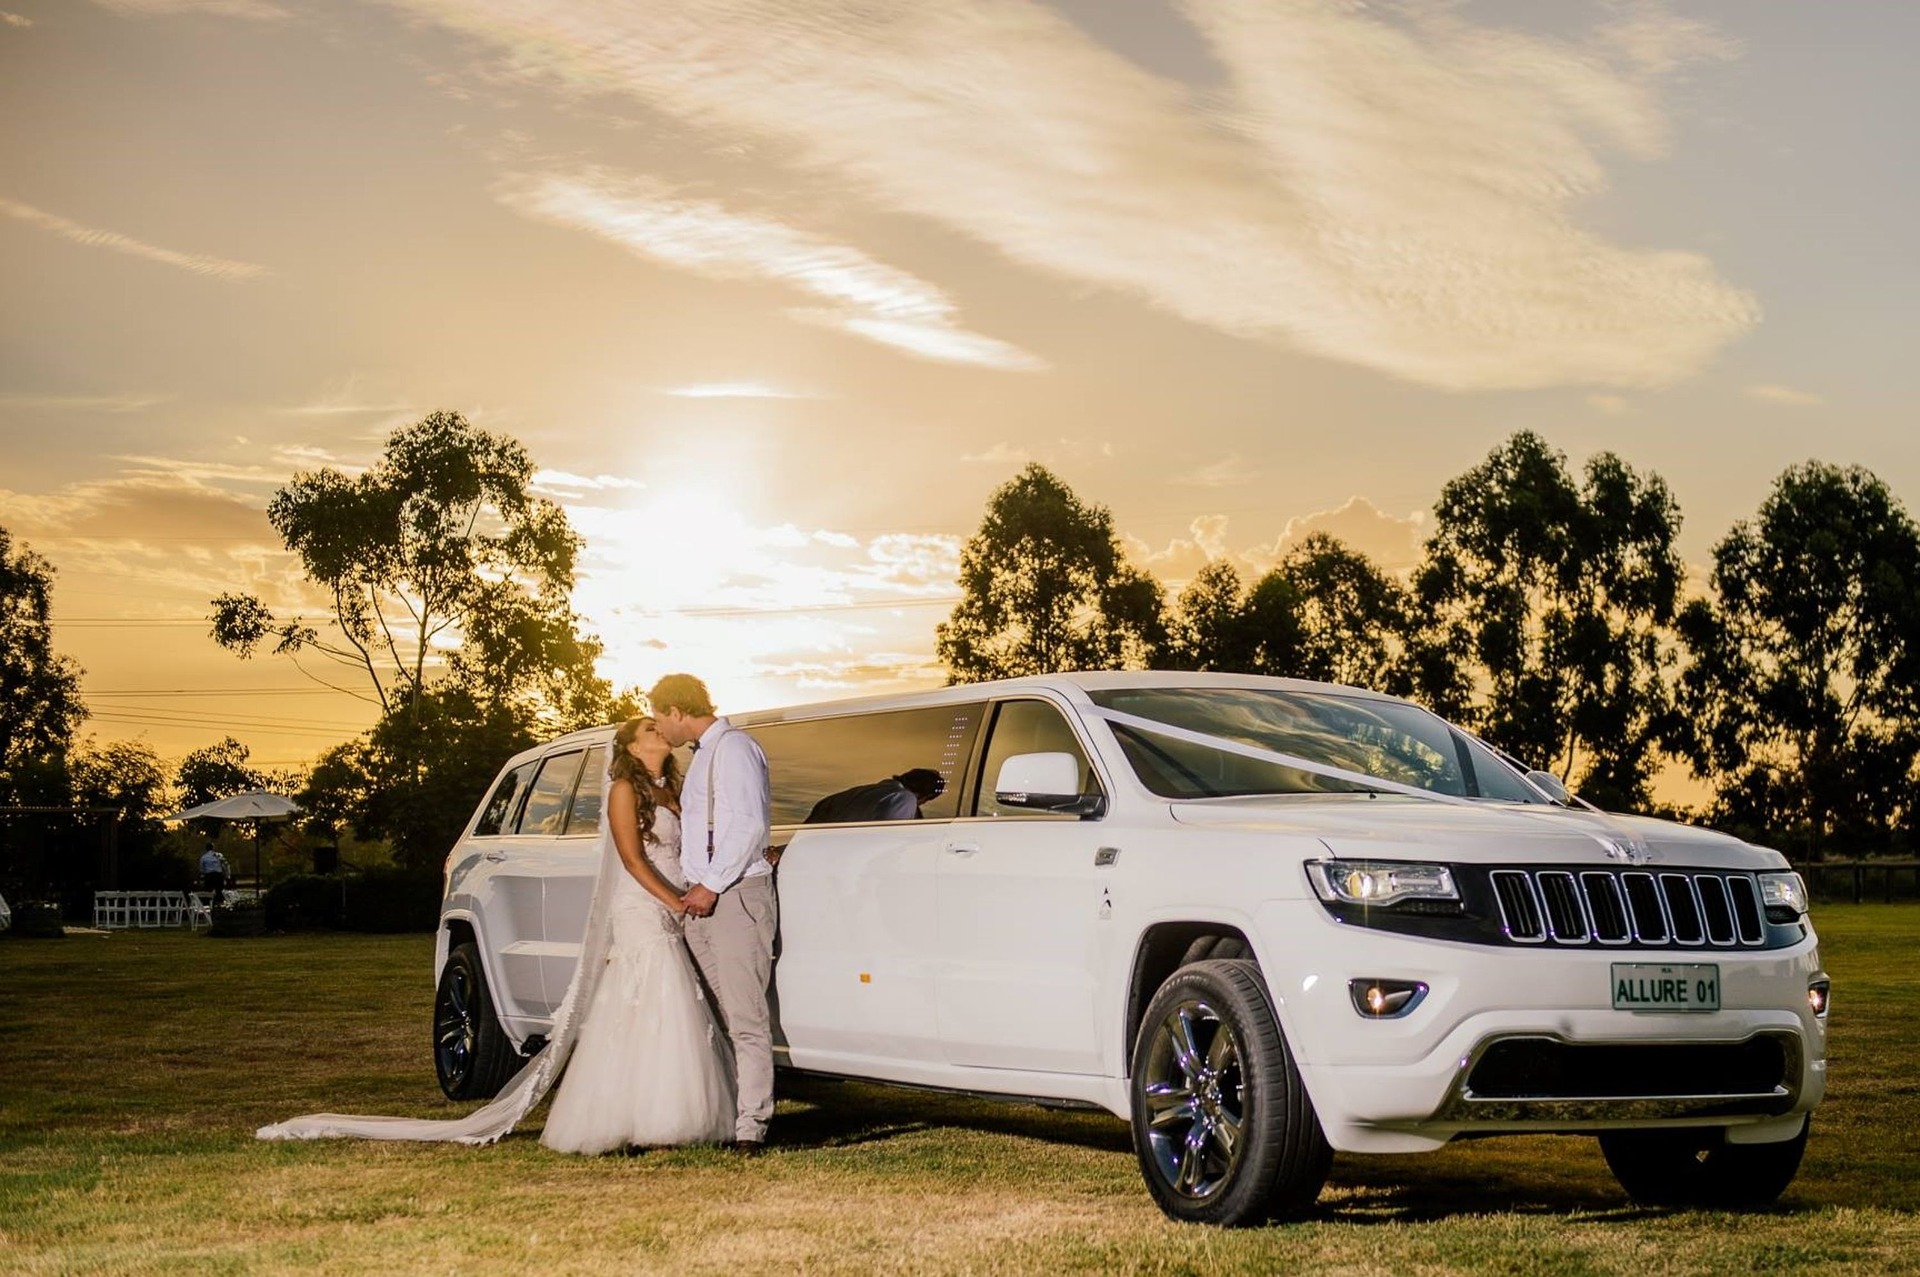 Make That Special Day Even More Special by Hiring A Limousine